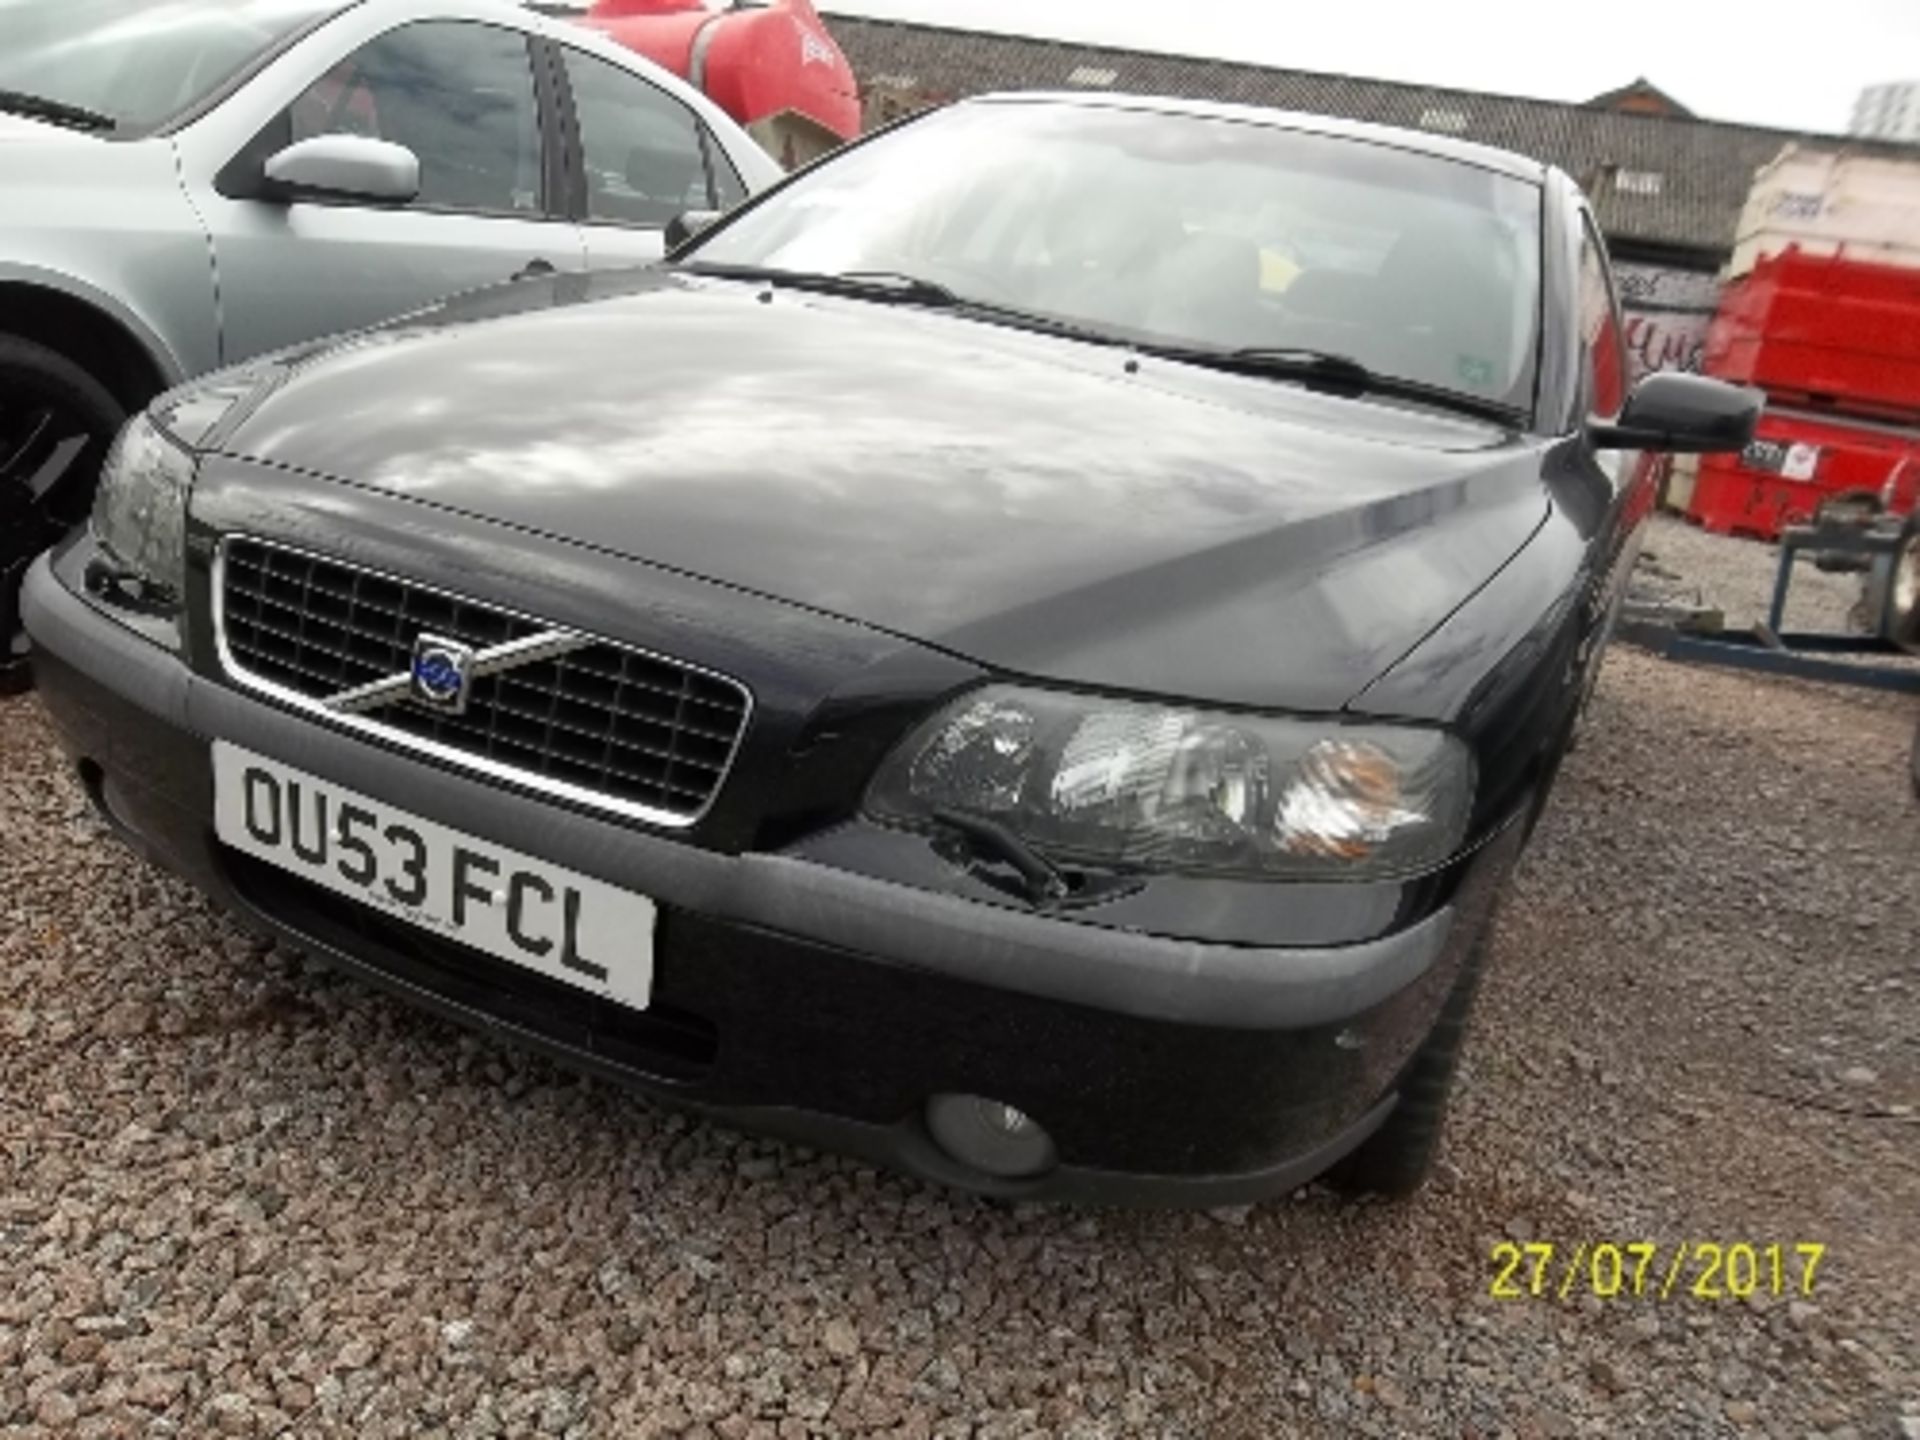 Volvo S60 SE T Geartronic - OU53 FCL Date of registration: 27.10.2003 2521cc, petrol, 5 speed - Image 2 of 4